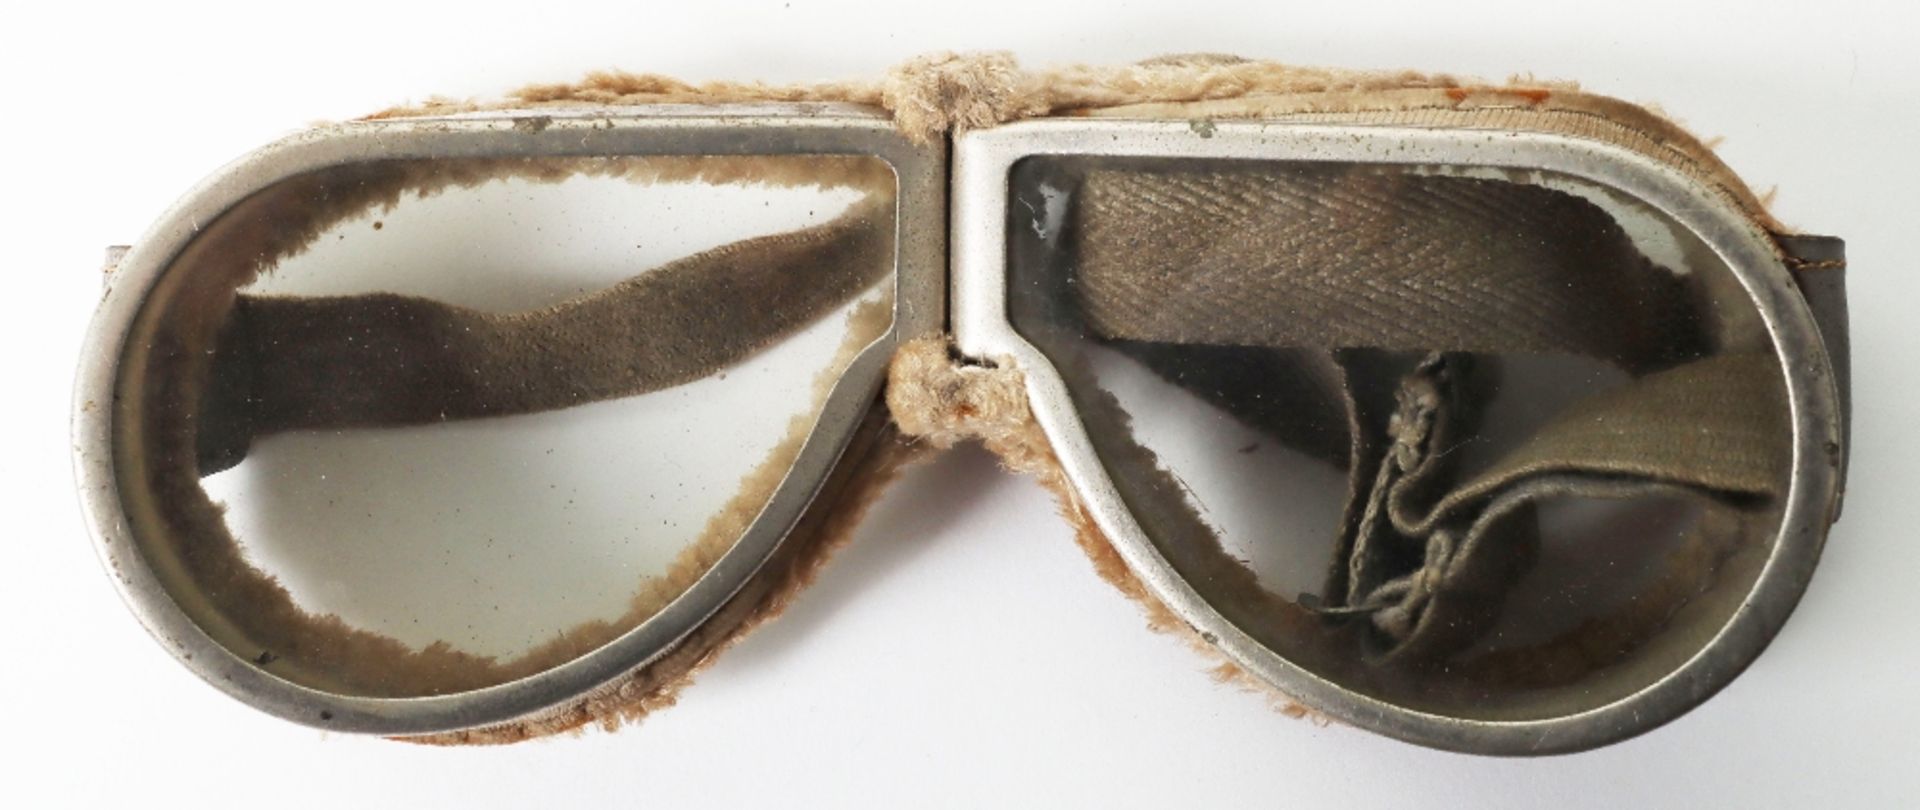 Three Pairs of Aviators Flying Goggles - Image 3 of 6